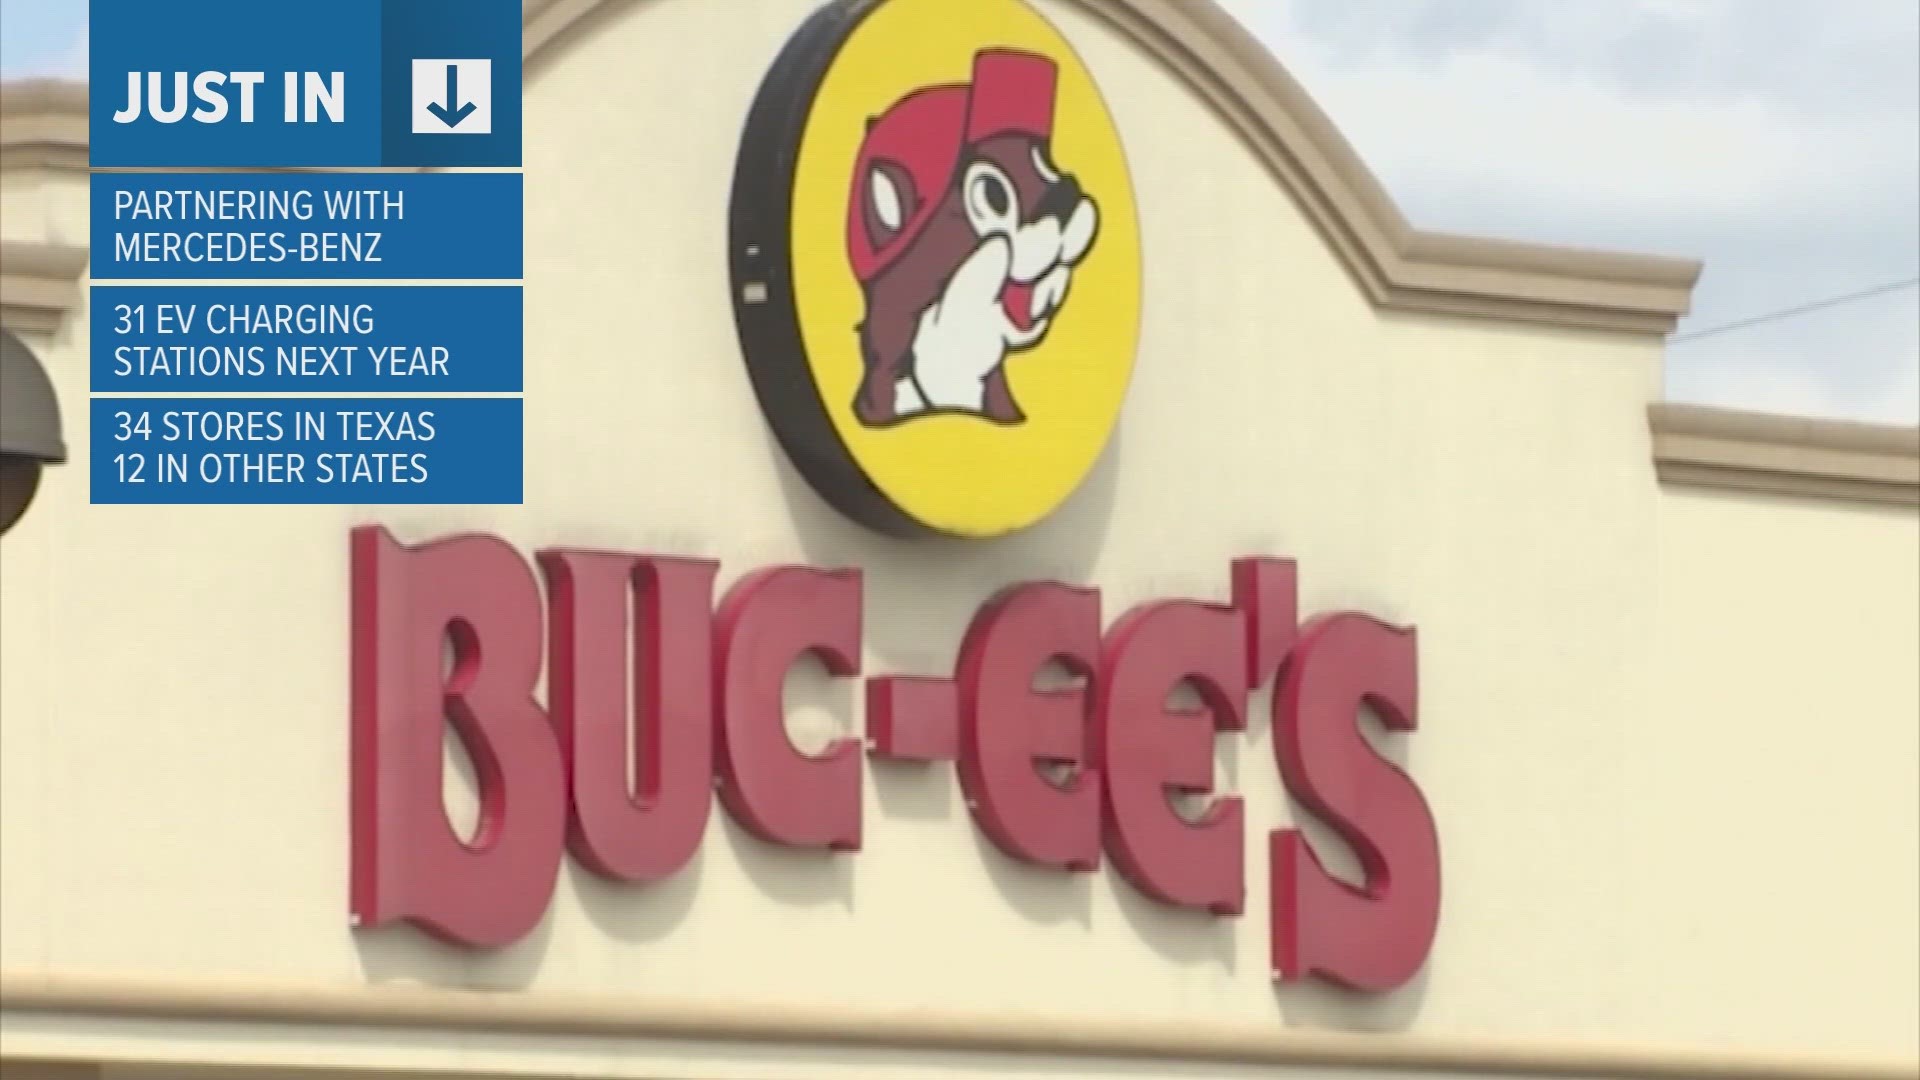 Buc-ee’s now has 34 stores across Texas, as well as 12 locations in other states.